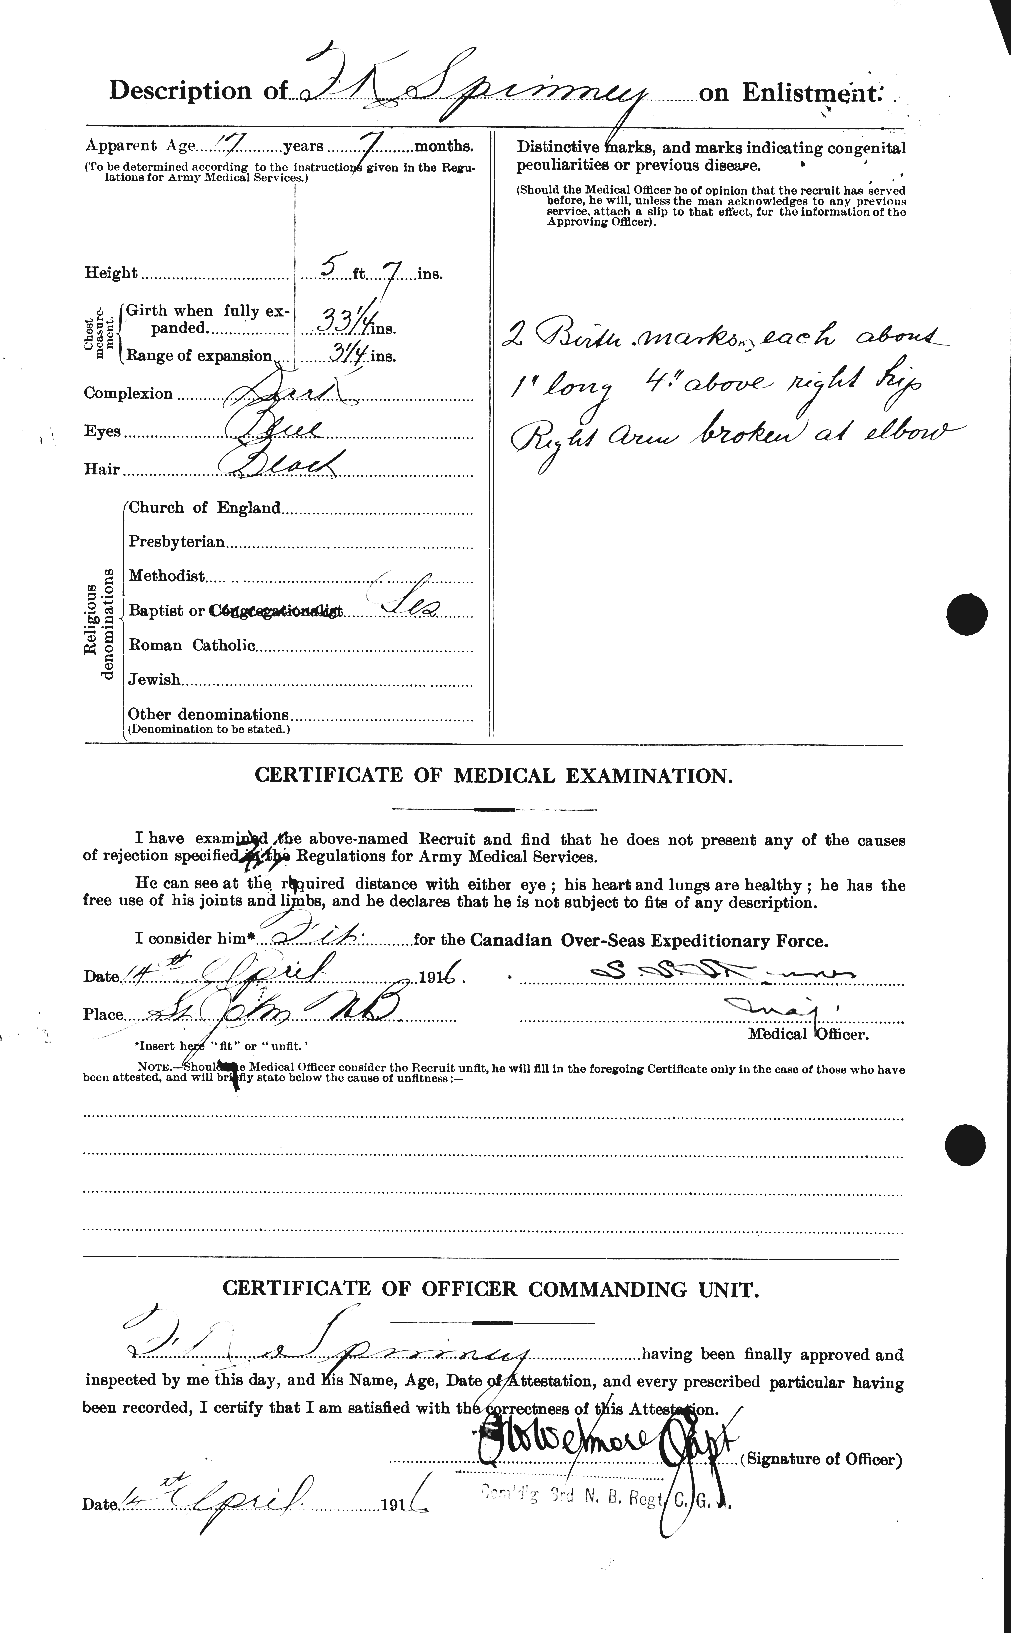 Personnel Records of the First World War - CEF 114418b